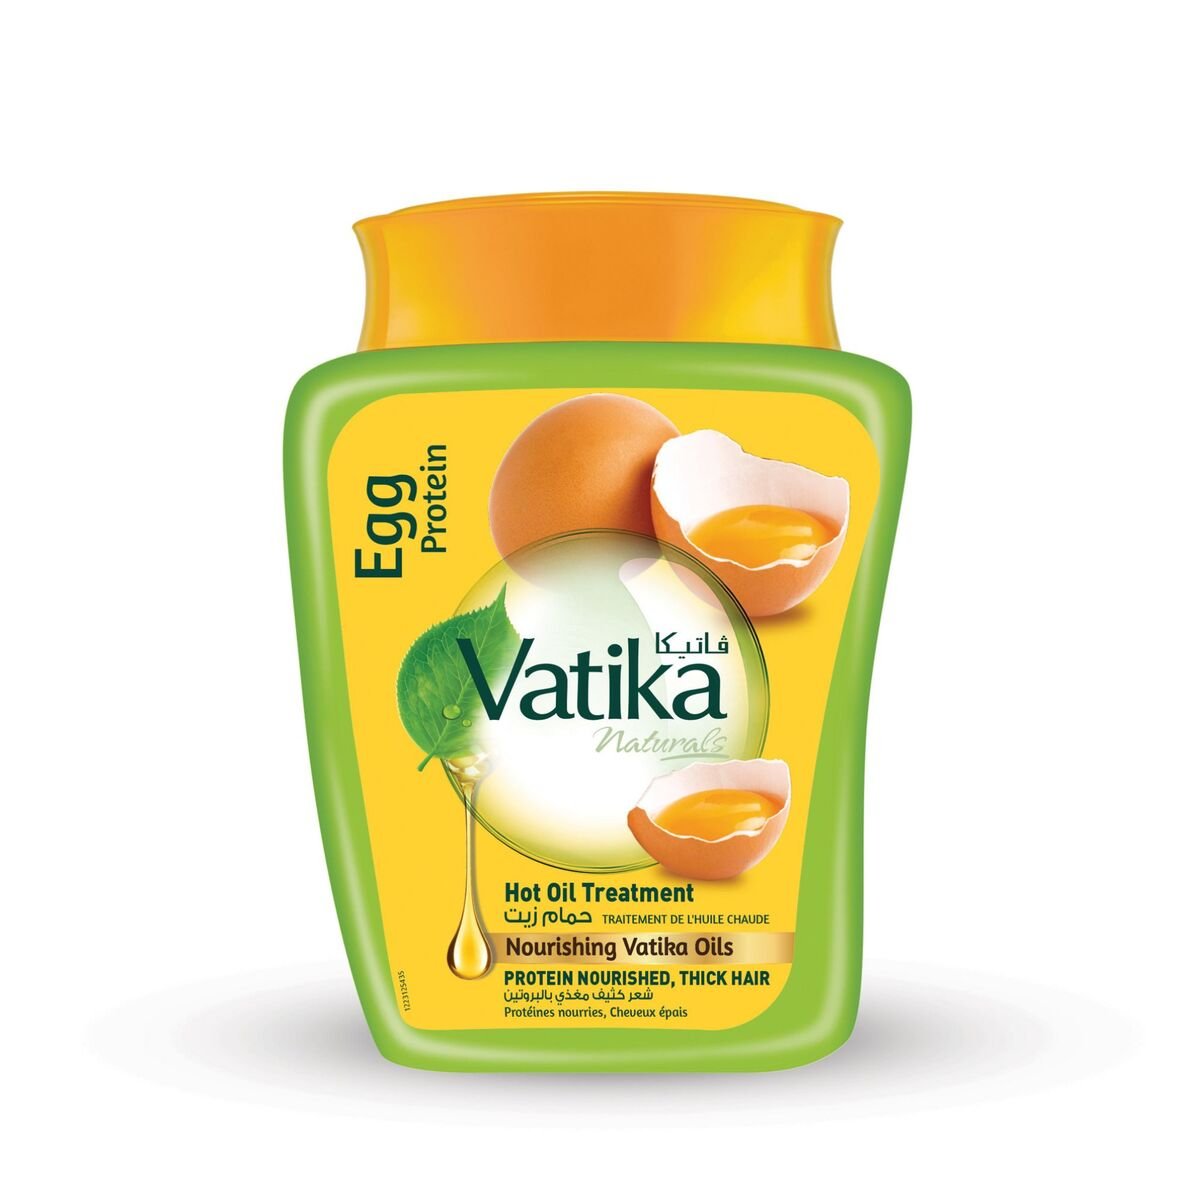 Vatika Naturals Hammam Zaith Hot Oil Treatment Enriched With Egg Protein For Nourished & Thick Hair 500 g